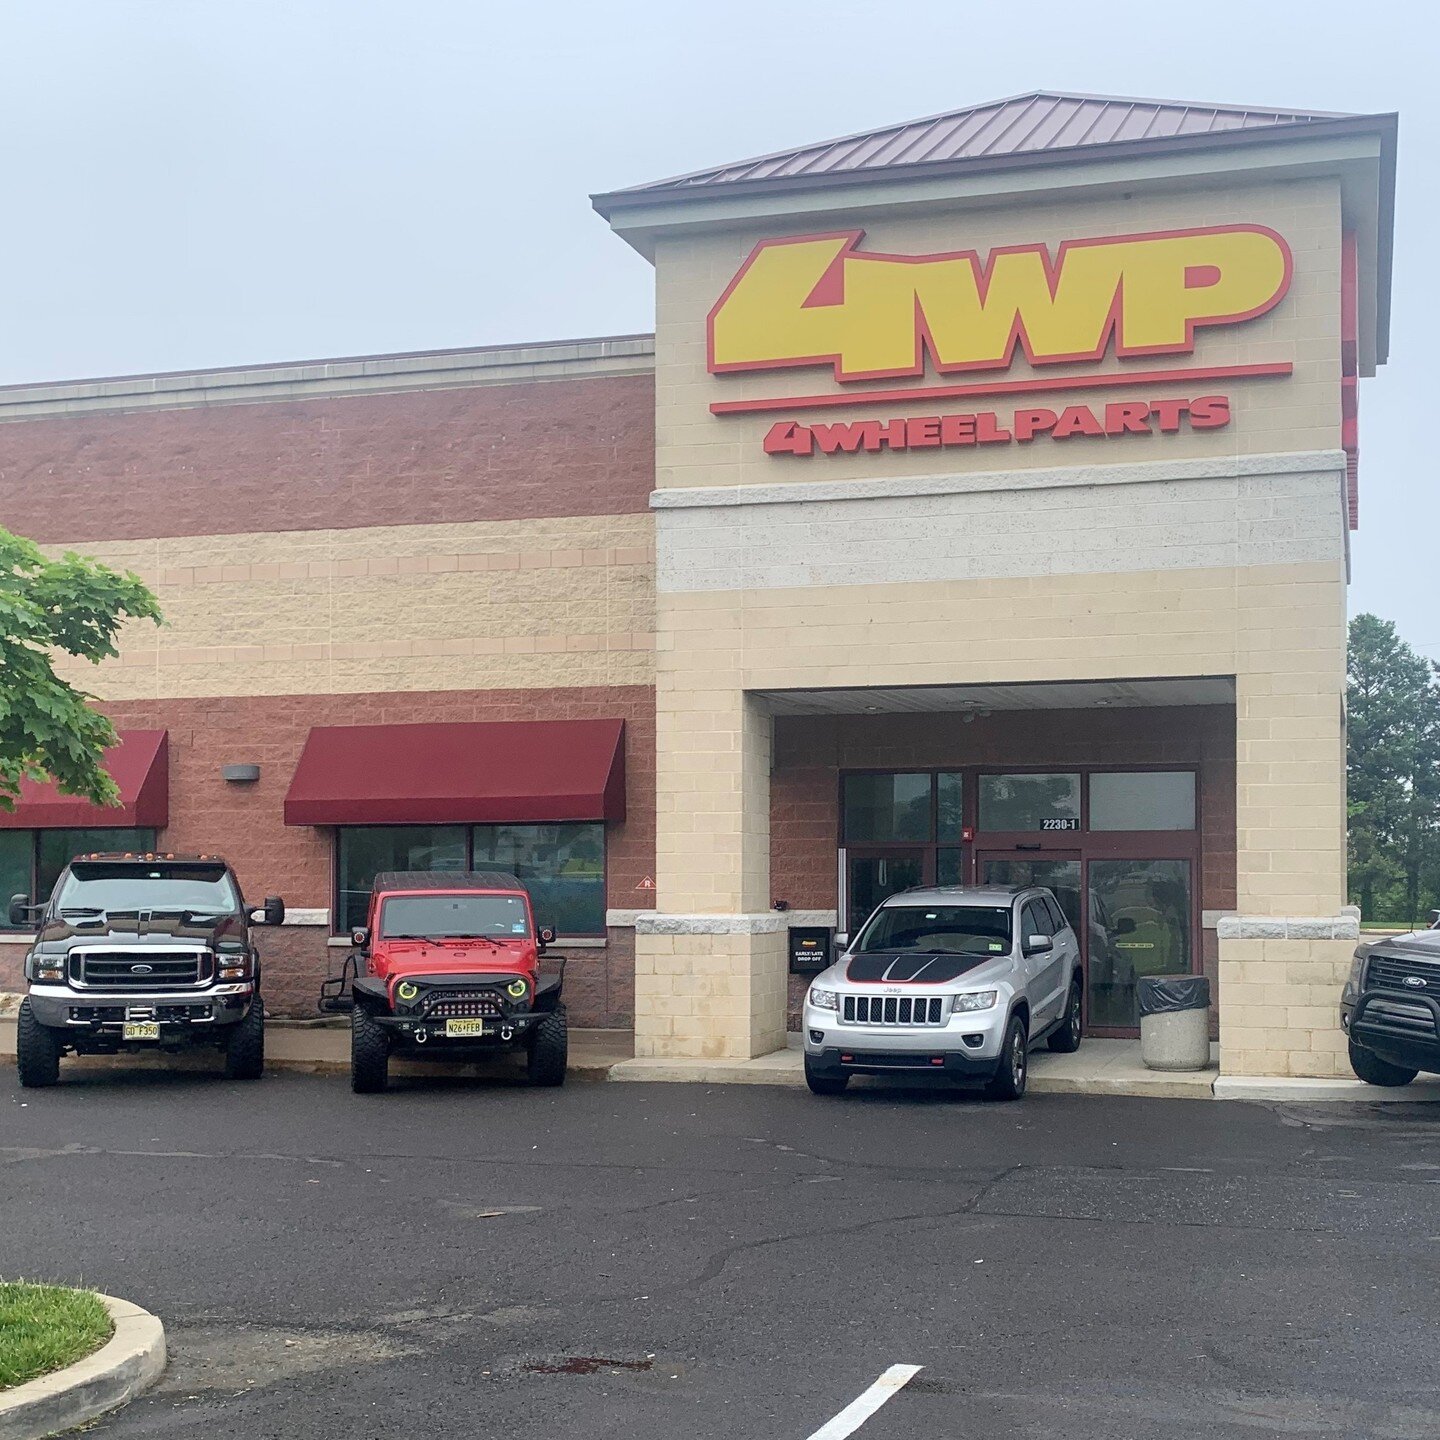 The 4 Wheel Parts in Cherry Hill, New Jersey is now open for business. We appreciate our long-standing relationship with @4wheelpartsofficial and look forward to many more projects together. 
.
.
#4wheelparts #wrnewman #generalcontractor #constructio